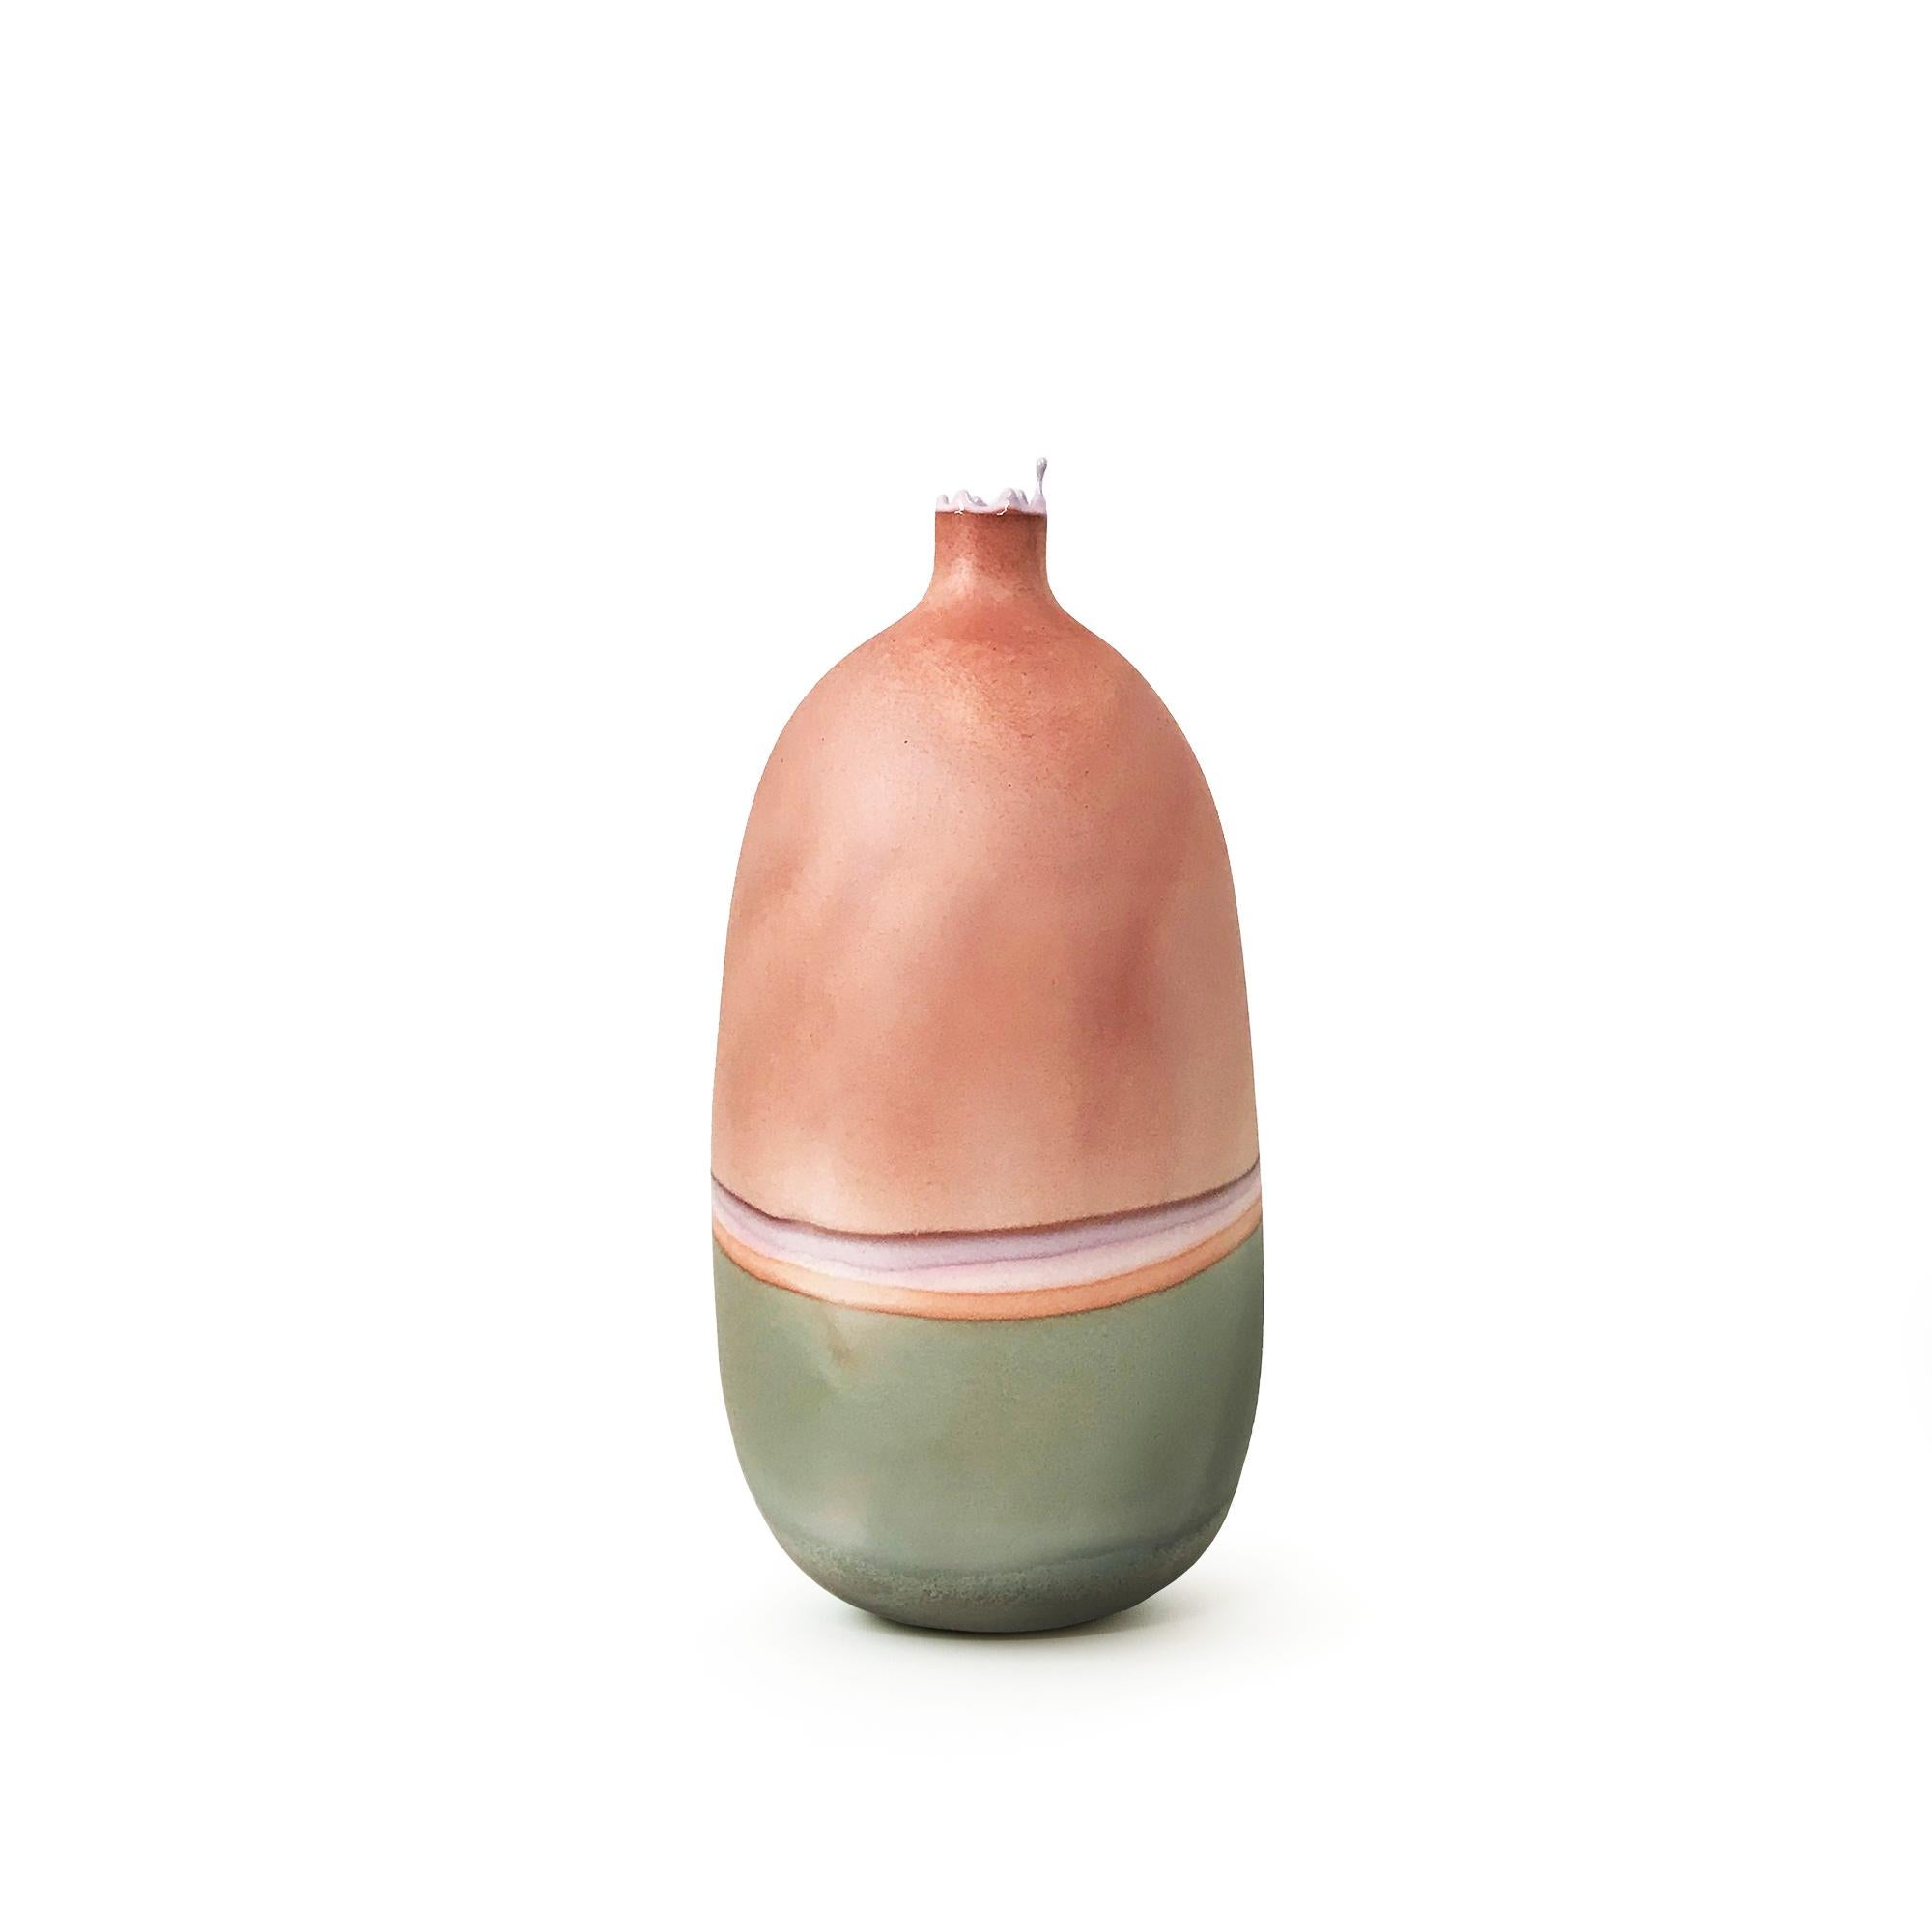 Peach Coral Patina Mercury Vase by Elyse Graham
Dimensions: W 14 x D 14 x H 25.5cm
Materials: Plaster, Resin
MOLDED, DYED, AND FINISHED BY HAND IN LA. CUSTOMIZATION
AVAILABLE.
ALL PIECES ARE MADE TO ORDER

This collection of vessels is inspired by